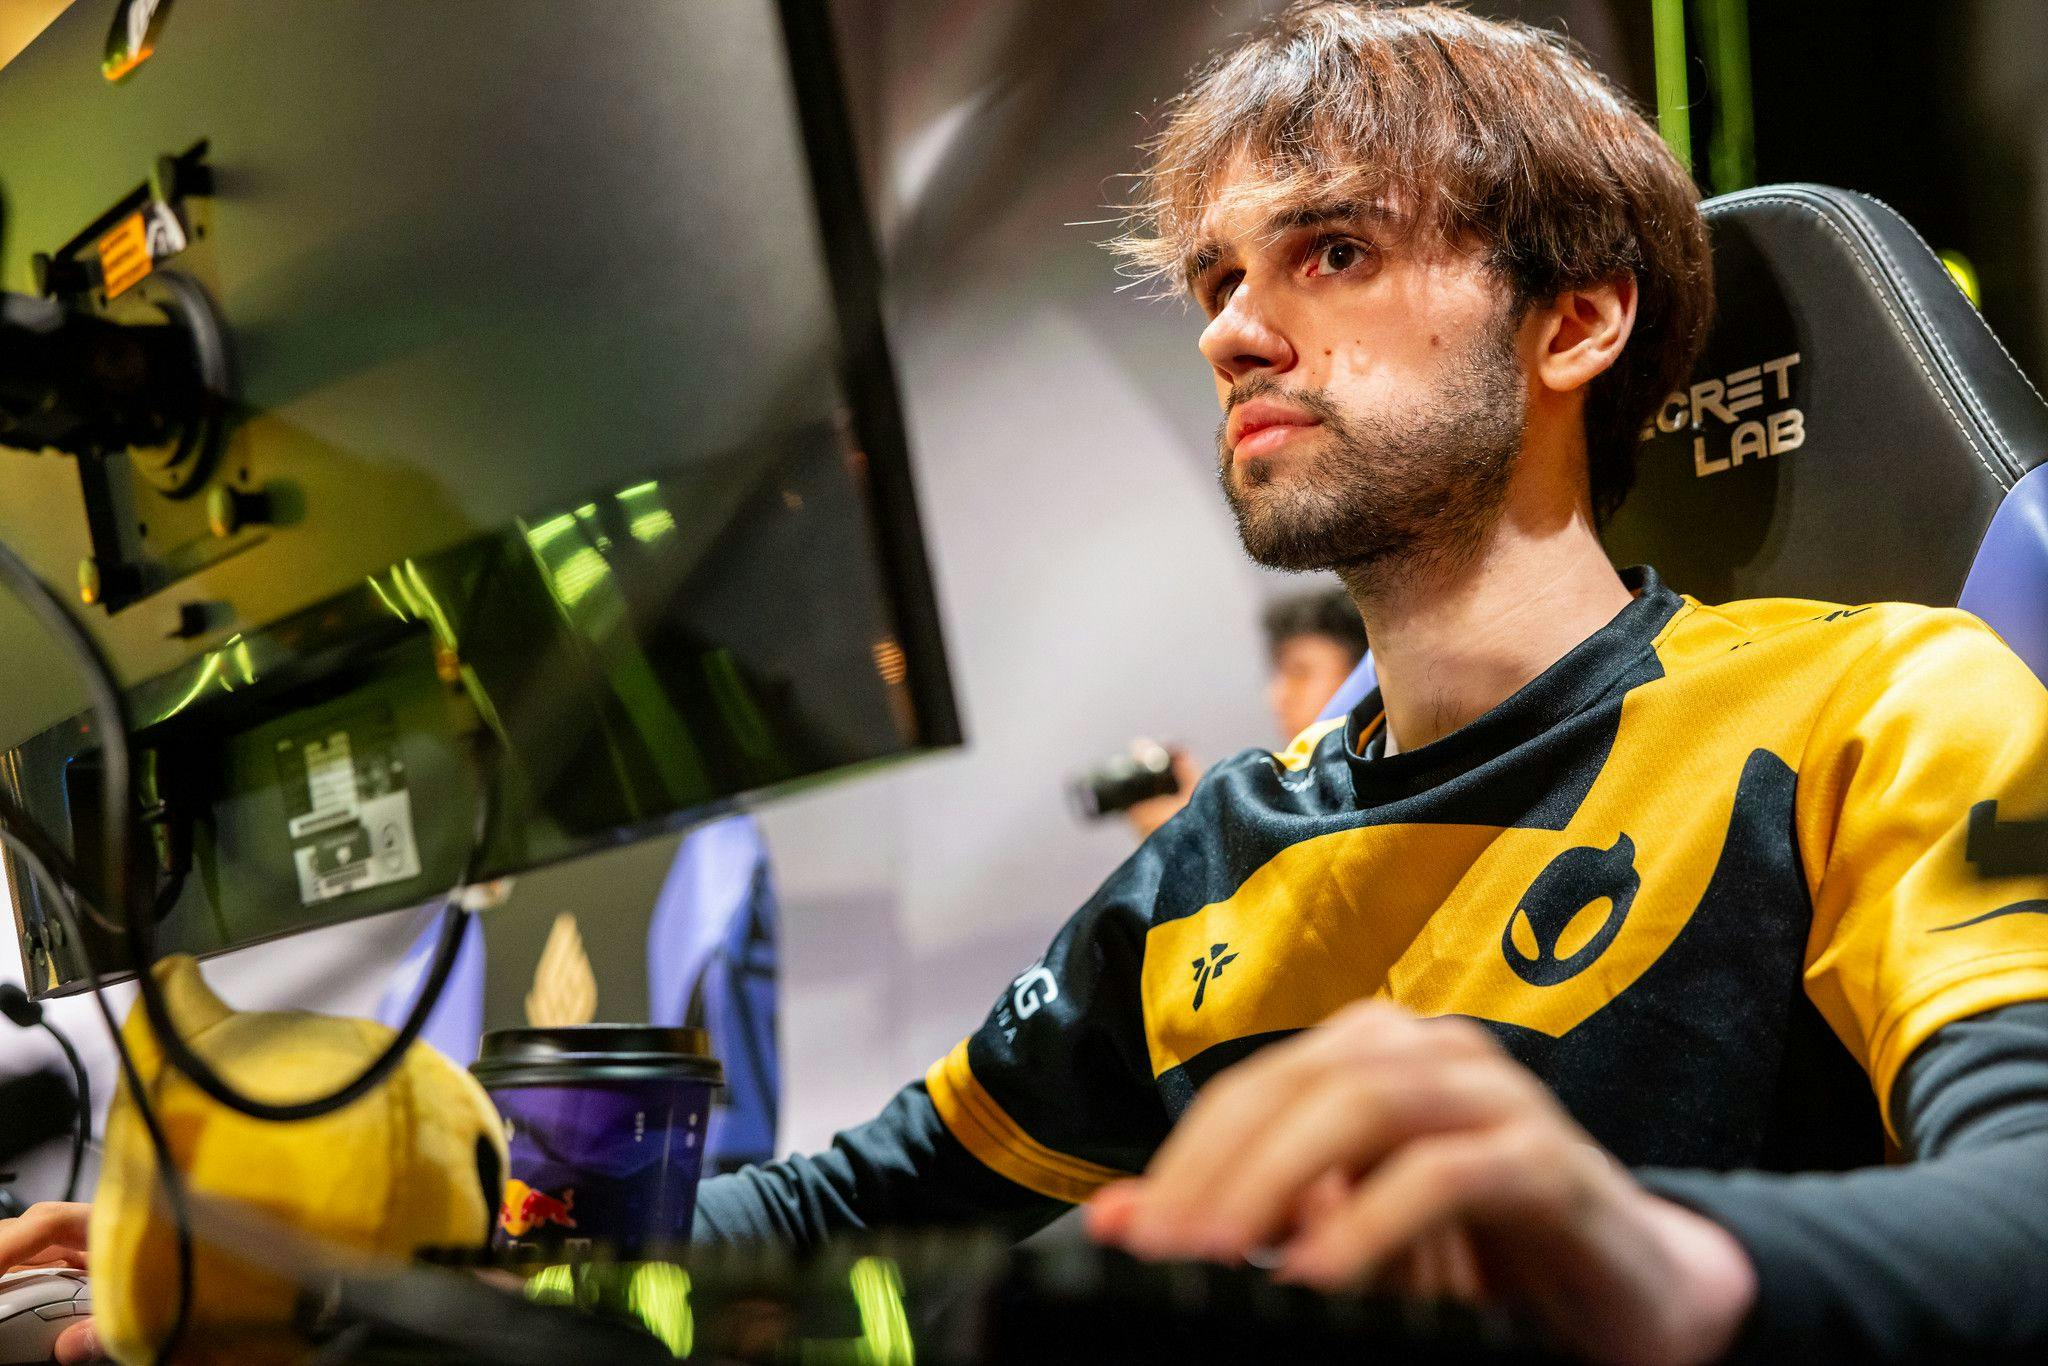 Poome, most recently playing for Dignitas.